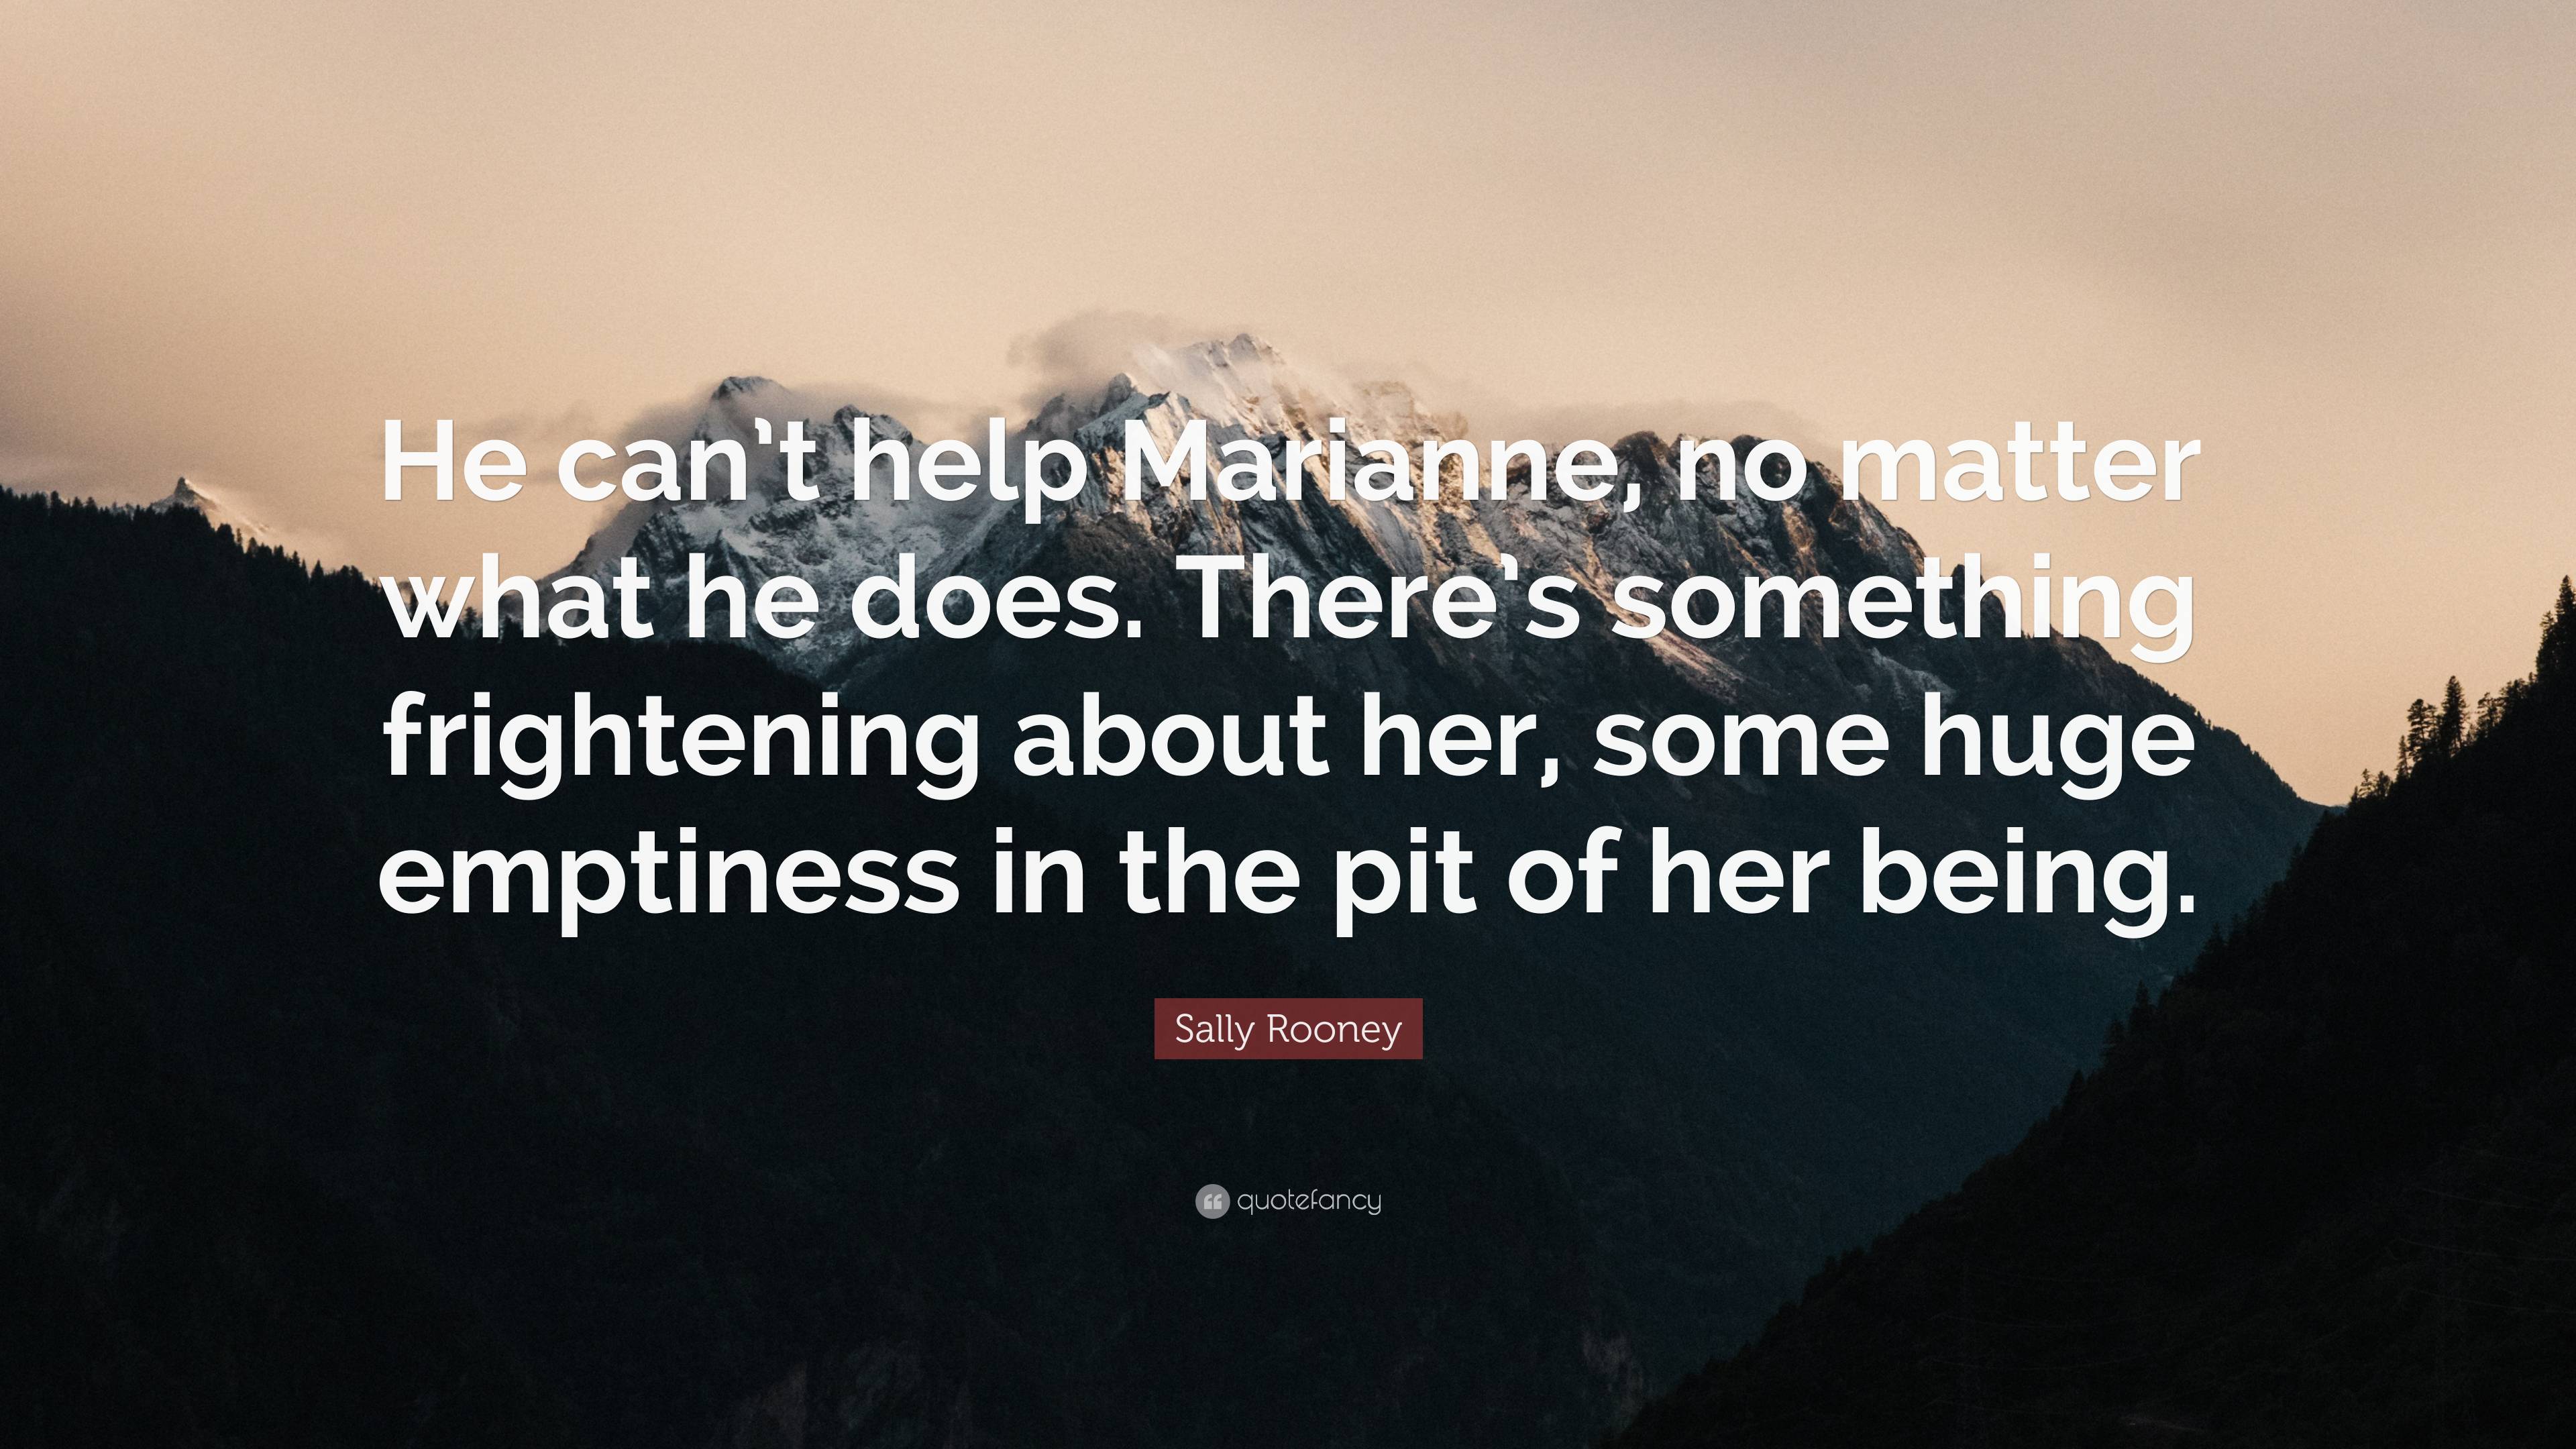 Sally Rooney Quote “He can’t help Marianne, no matter what he does